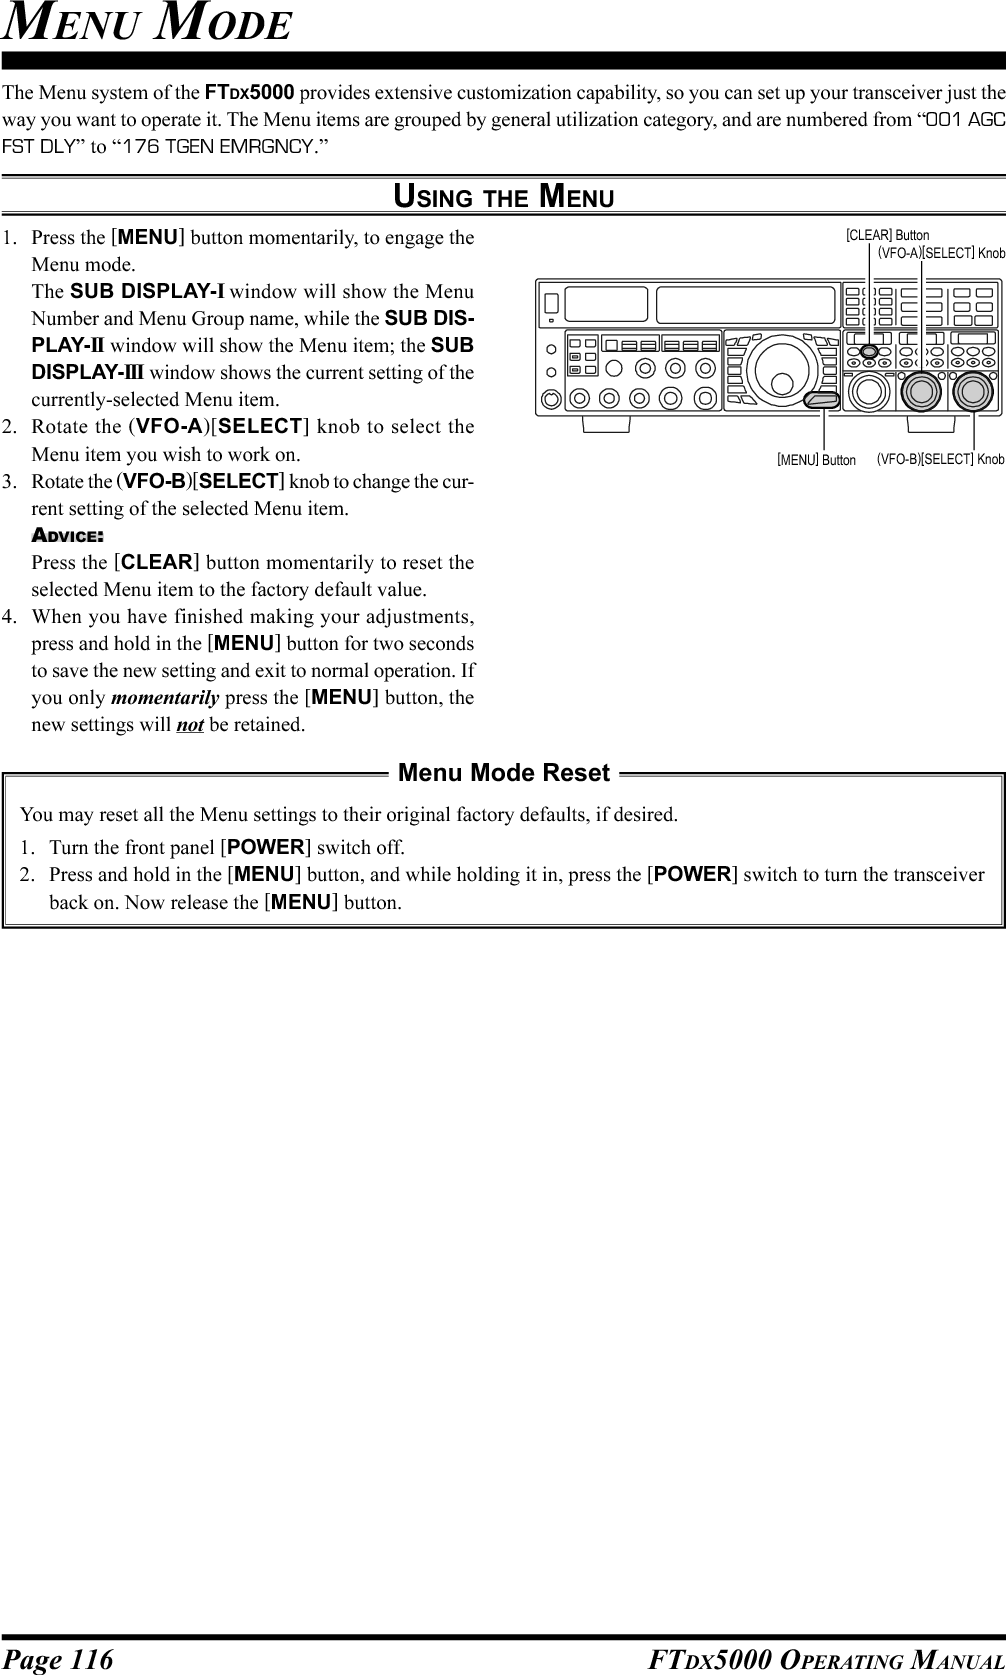 Page 116 FTDX5000 OPERATING MANUALMENU MODEThe Menu system of the FTDX5000 provides extensive customization capability, so you can set up your transceiver just theway you want to operate it. The Menu items are grouped by general utilization category, and are numbered from “001 AGCFST DLY” to “176 TGEN EMRGNCY.”USING THE MENU1. Press the [MENU] button momentarily, to engage theMenu mode.The SUB DISPLAY-I window will show the MenuNumber and Menu Group name, while the SUB DIS-PLAY-II  window will show the Menu item; the SUBDISPLAY-III  window shows the current setting of thecurrently-selected Menu item.2. Rotate the (VFO-A)[SELECT] knob to select theMenu item you wish to work on.3. Rotate the (VFO-B)[SELECT] knob to change the cur-rent setting of the selected Menu item.ADVICE:Press the [CLEAR] button momentarily to reset theselected Menu item to the factory default value.4. When you have finished making your adjustments,press and hold in the [MENU] button for two secondsto save the new setting and exit to normal operation. Ifyou only momentarily press the [MENU] button, thenew settings will not be retained.Menu Mode ResetYou may reset all the Menu settings to their original factory defaults, if desired.1. Turn the front panel [POWER] switch off.2. Press and hold in the [MENU] button, and while holding it in, press the [POWER] switch to turn the transceiverback on. Now release the [MENU] button.(VFO-B)[SELECT] Knob[MENU] Button(VFO-A)[SELECT] Knob[CLEAR] Button